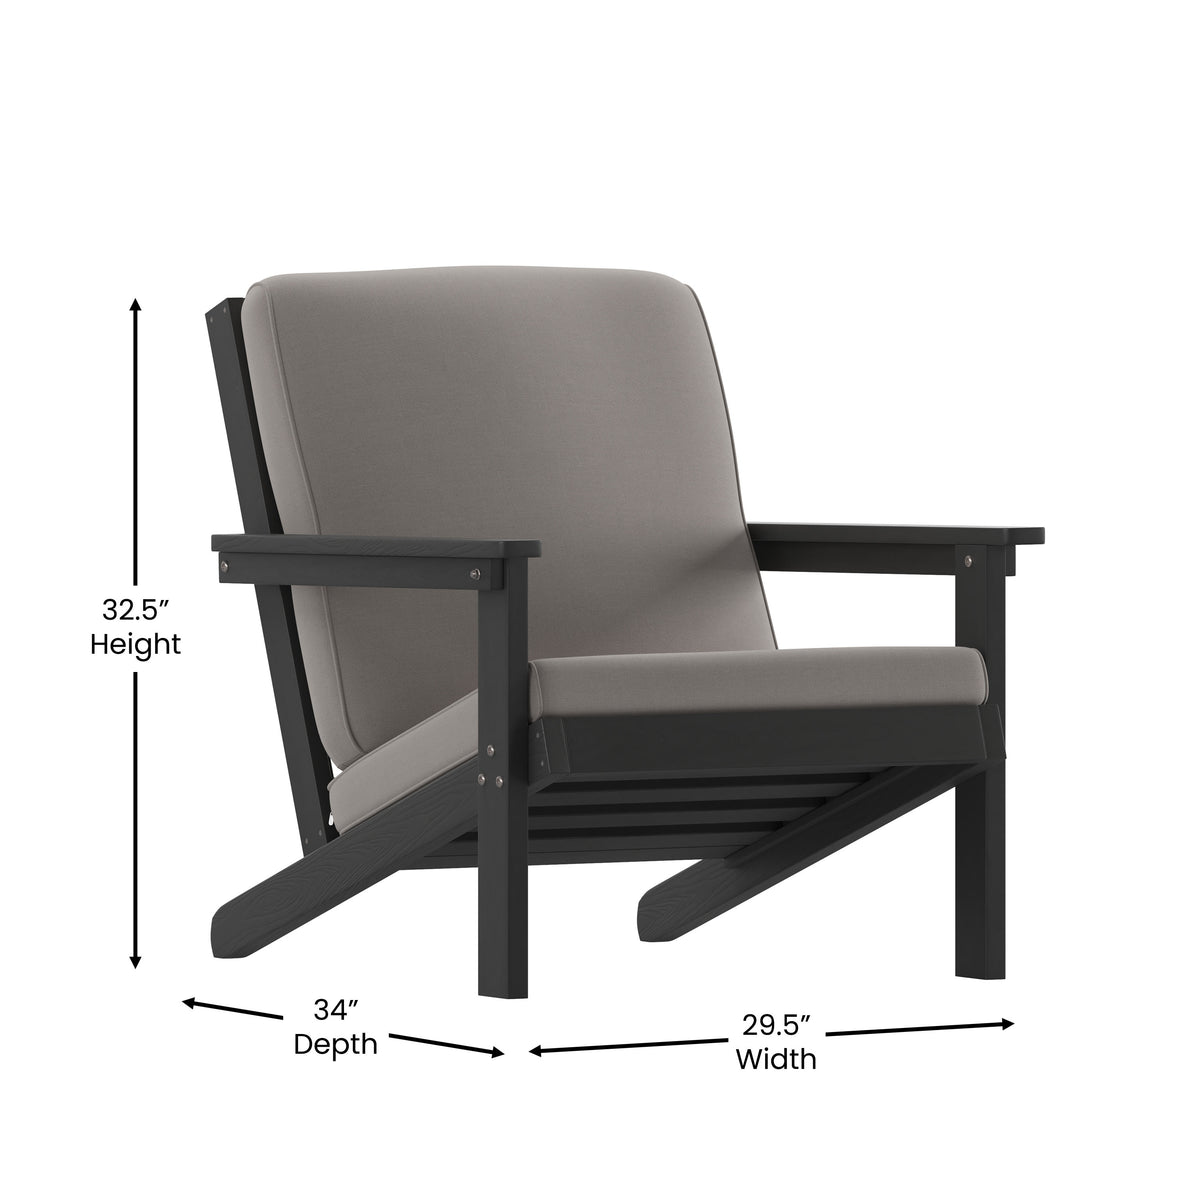 Black/Charcoal |#| All-Weather Poly Resin Adirondack Style Chair & Cushions - Black/Charcoal